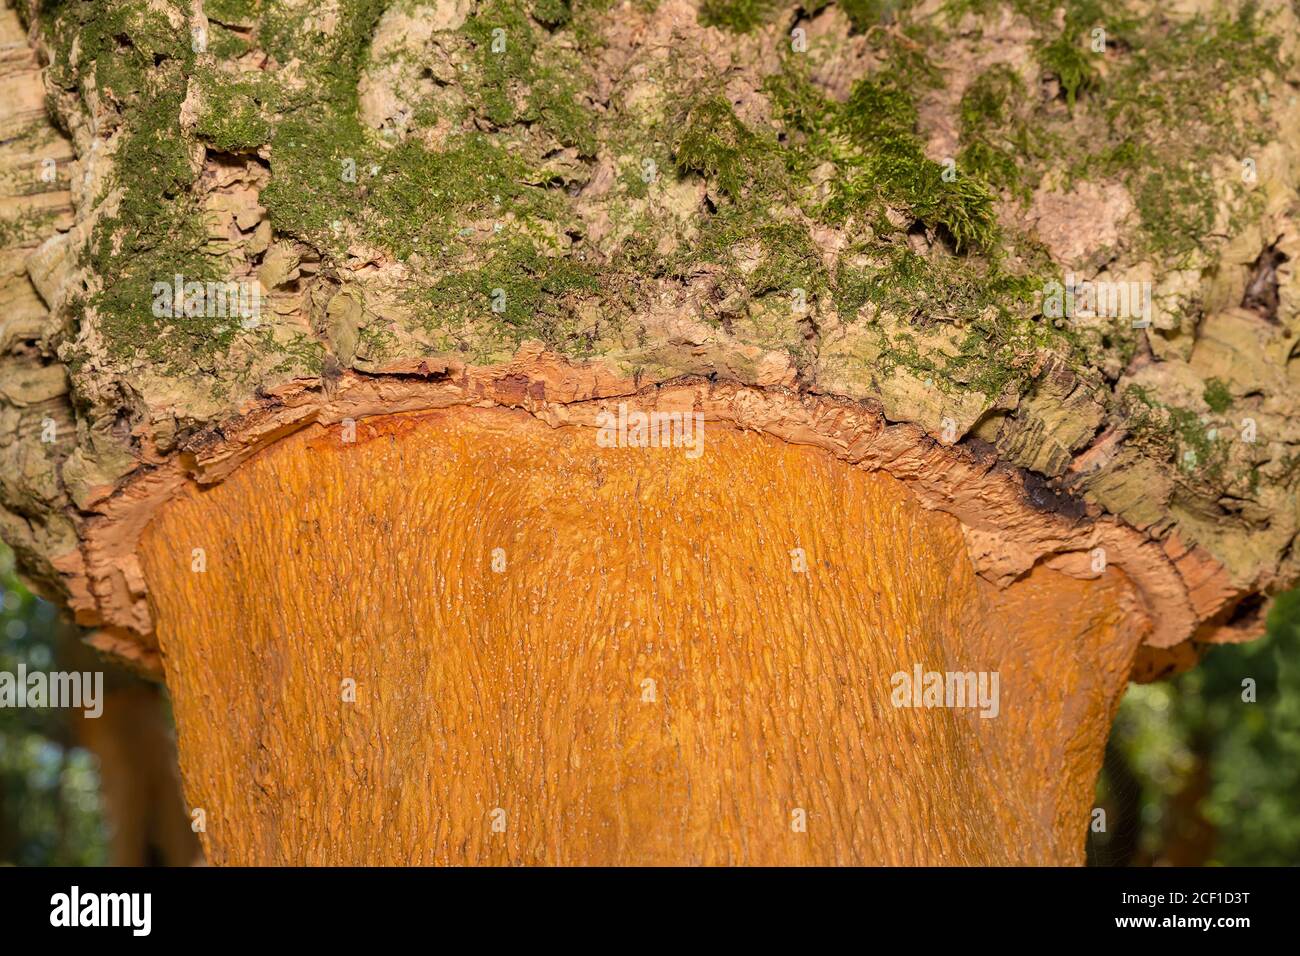 Cork oak tree with layers of cork bark on trunk in portuguese orchard Stock Photo